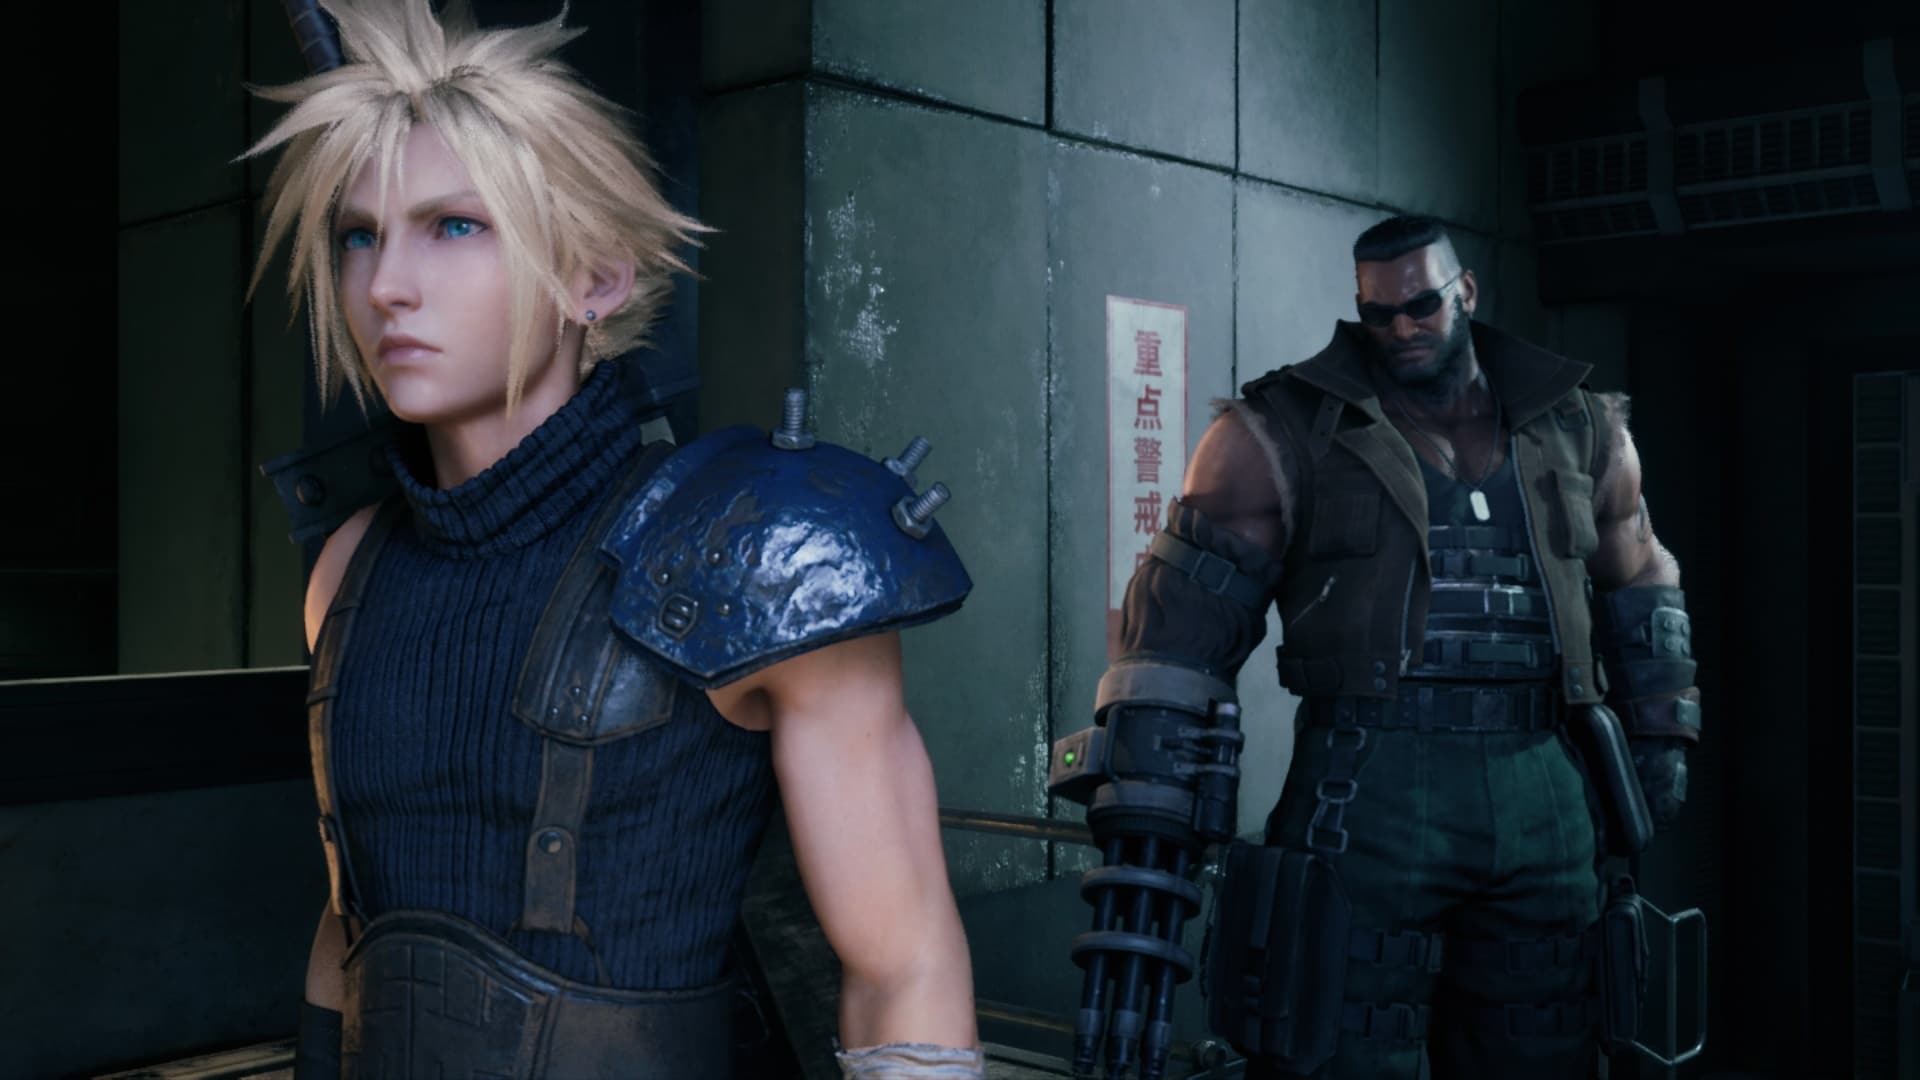 The rebels of Avalanche are back - with a new look but old demeanour. In the case of Cloud Strife and Barret Wallace, that means constant strife.